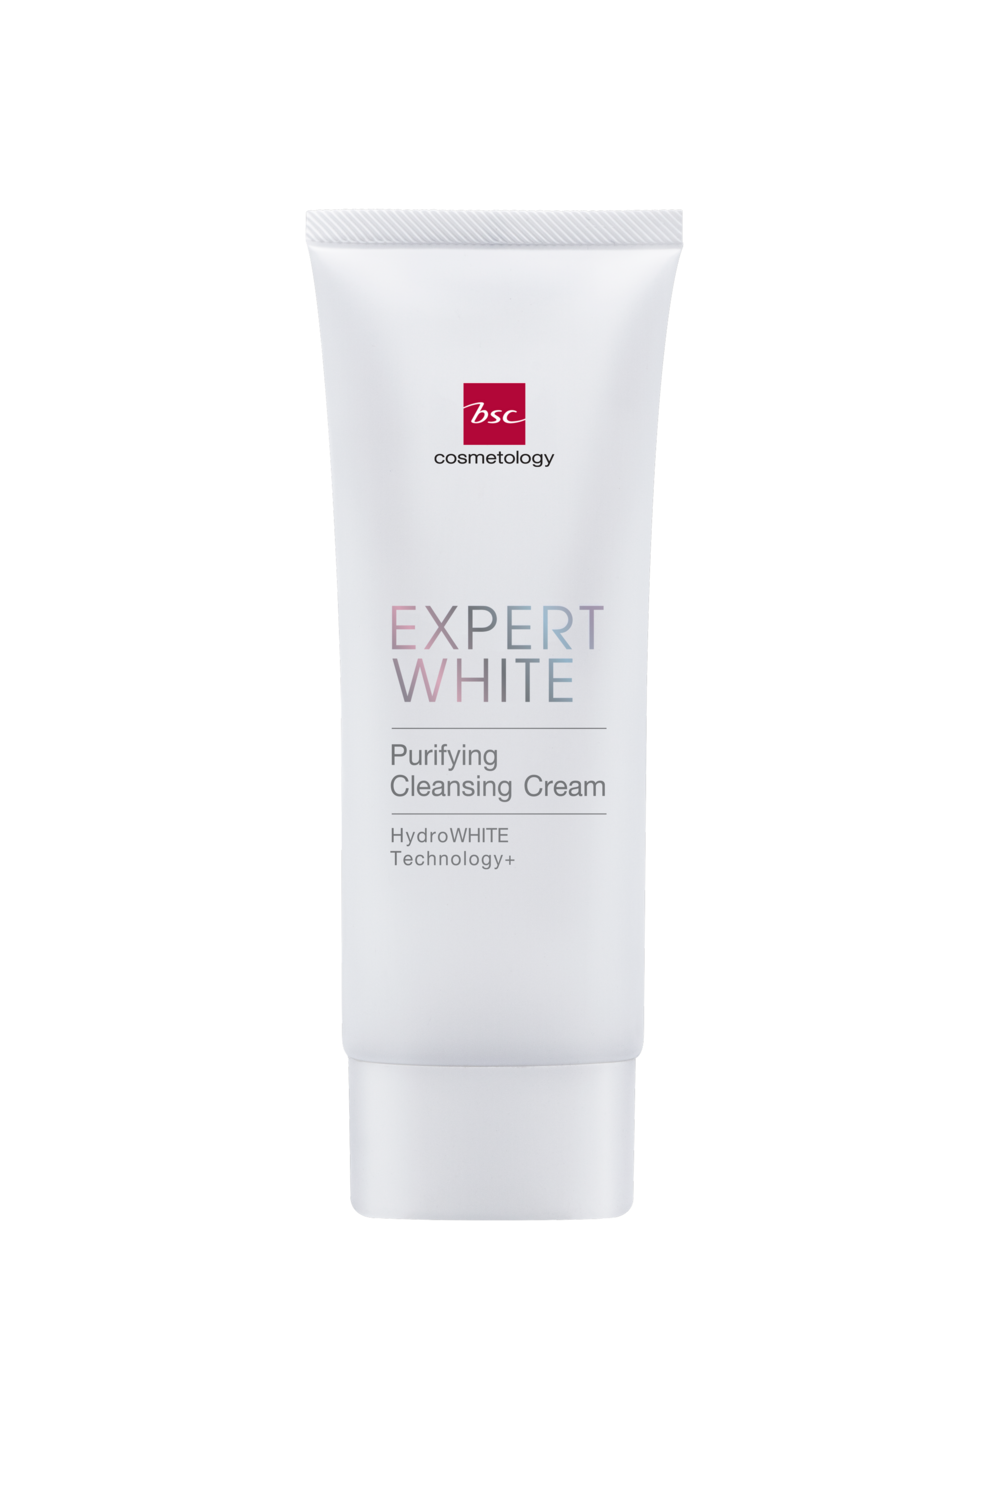 BSC EXPERT WHITE PURIFYING CLEANSING CREAM